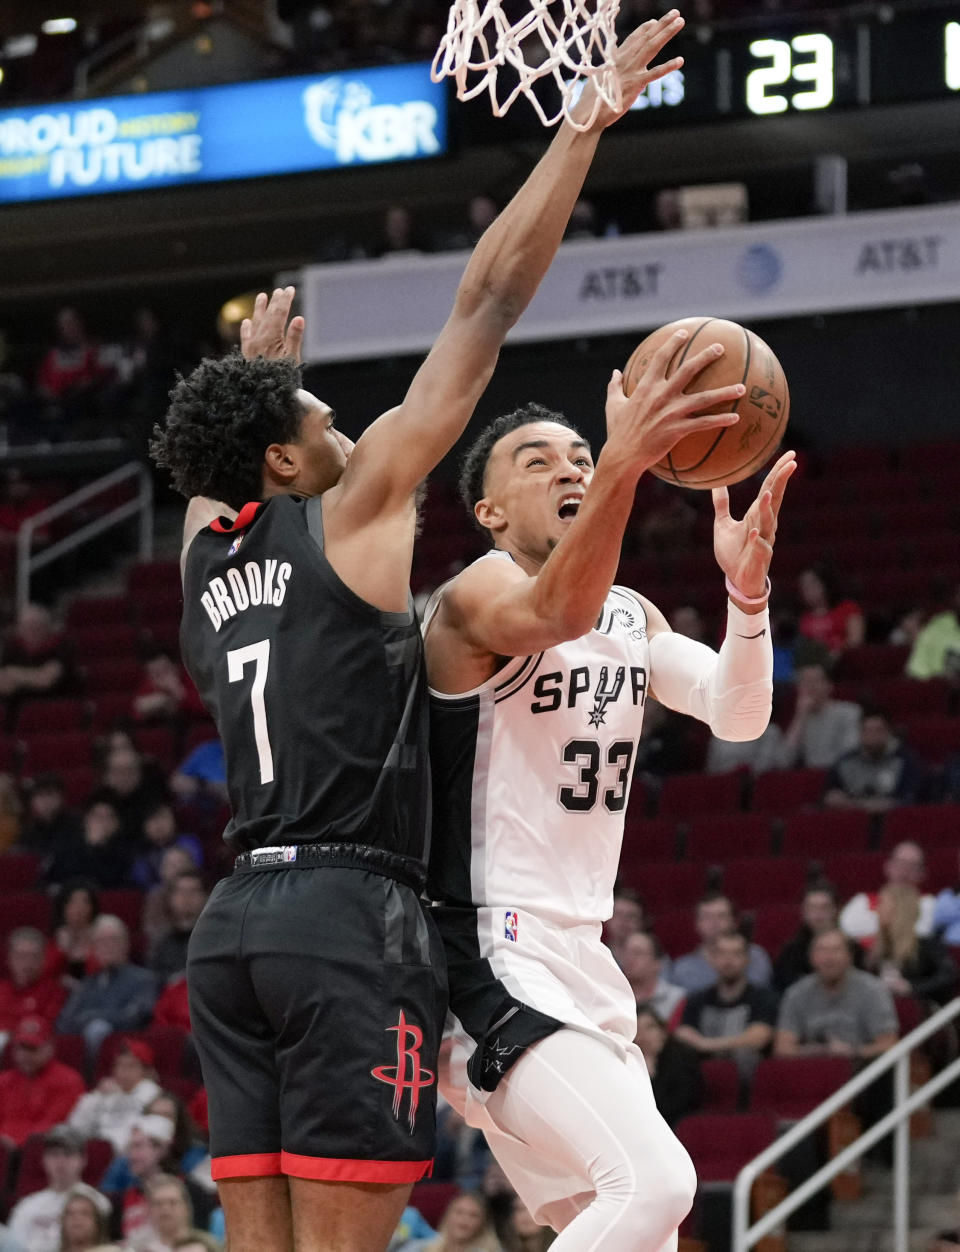 San Antonio Spurs guard Tre Jones (33) drives to the basket as Houston Rockets guard Armoni Brooks defends during the first half of an NBA basketball game, Tuesday, Jan. 25, 2022, in Houston. (AP Photo/Eric Christian Smith)